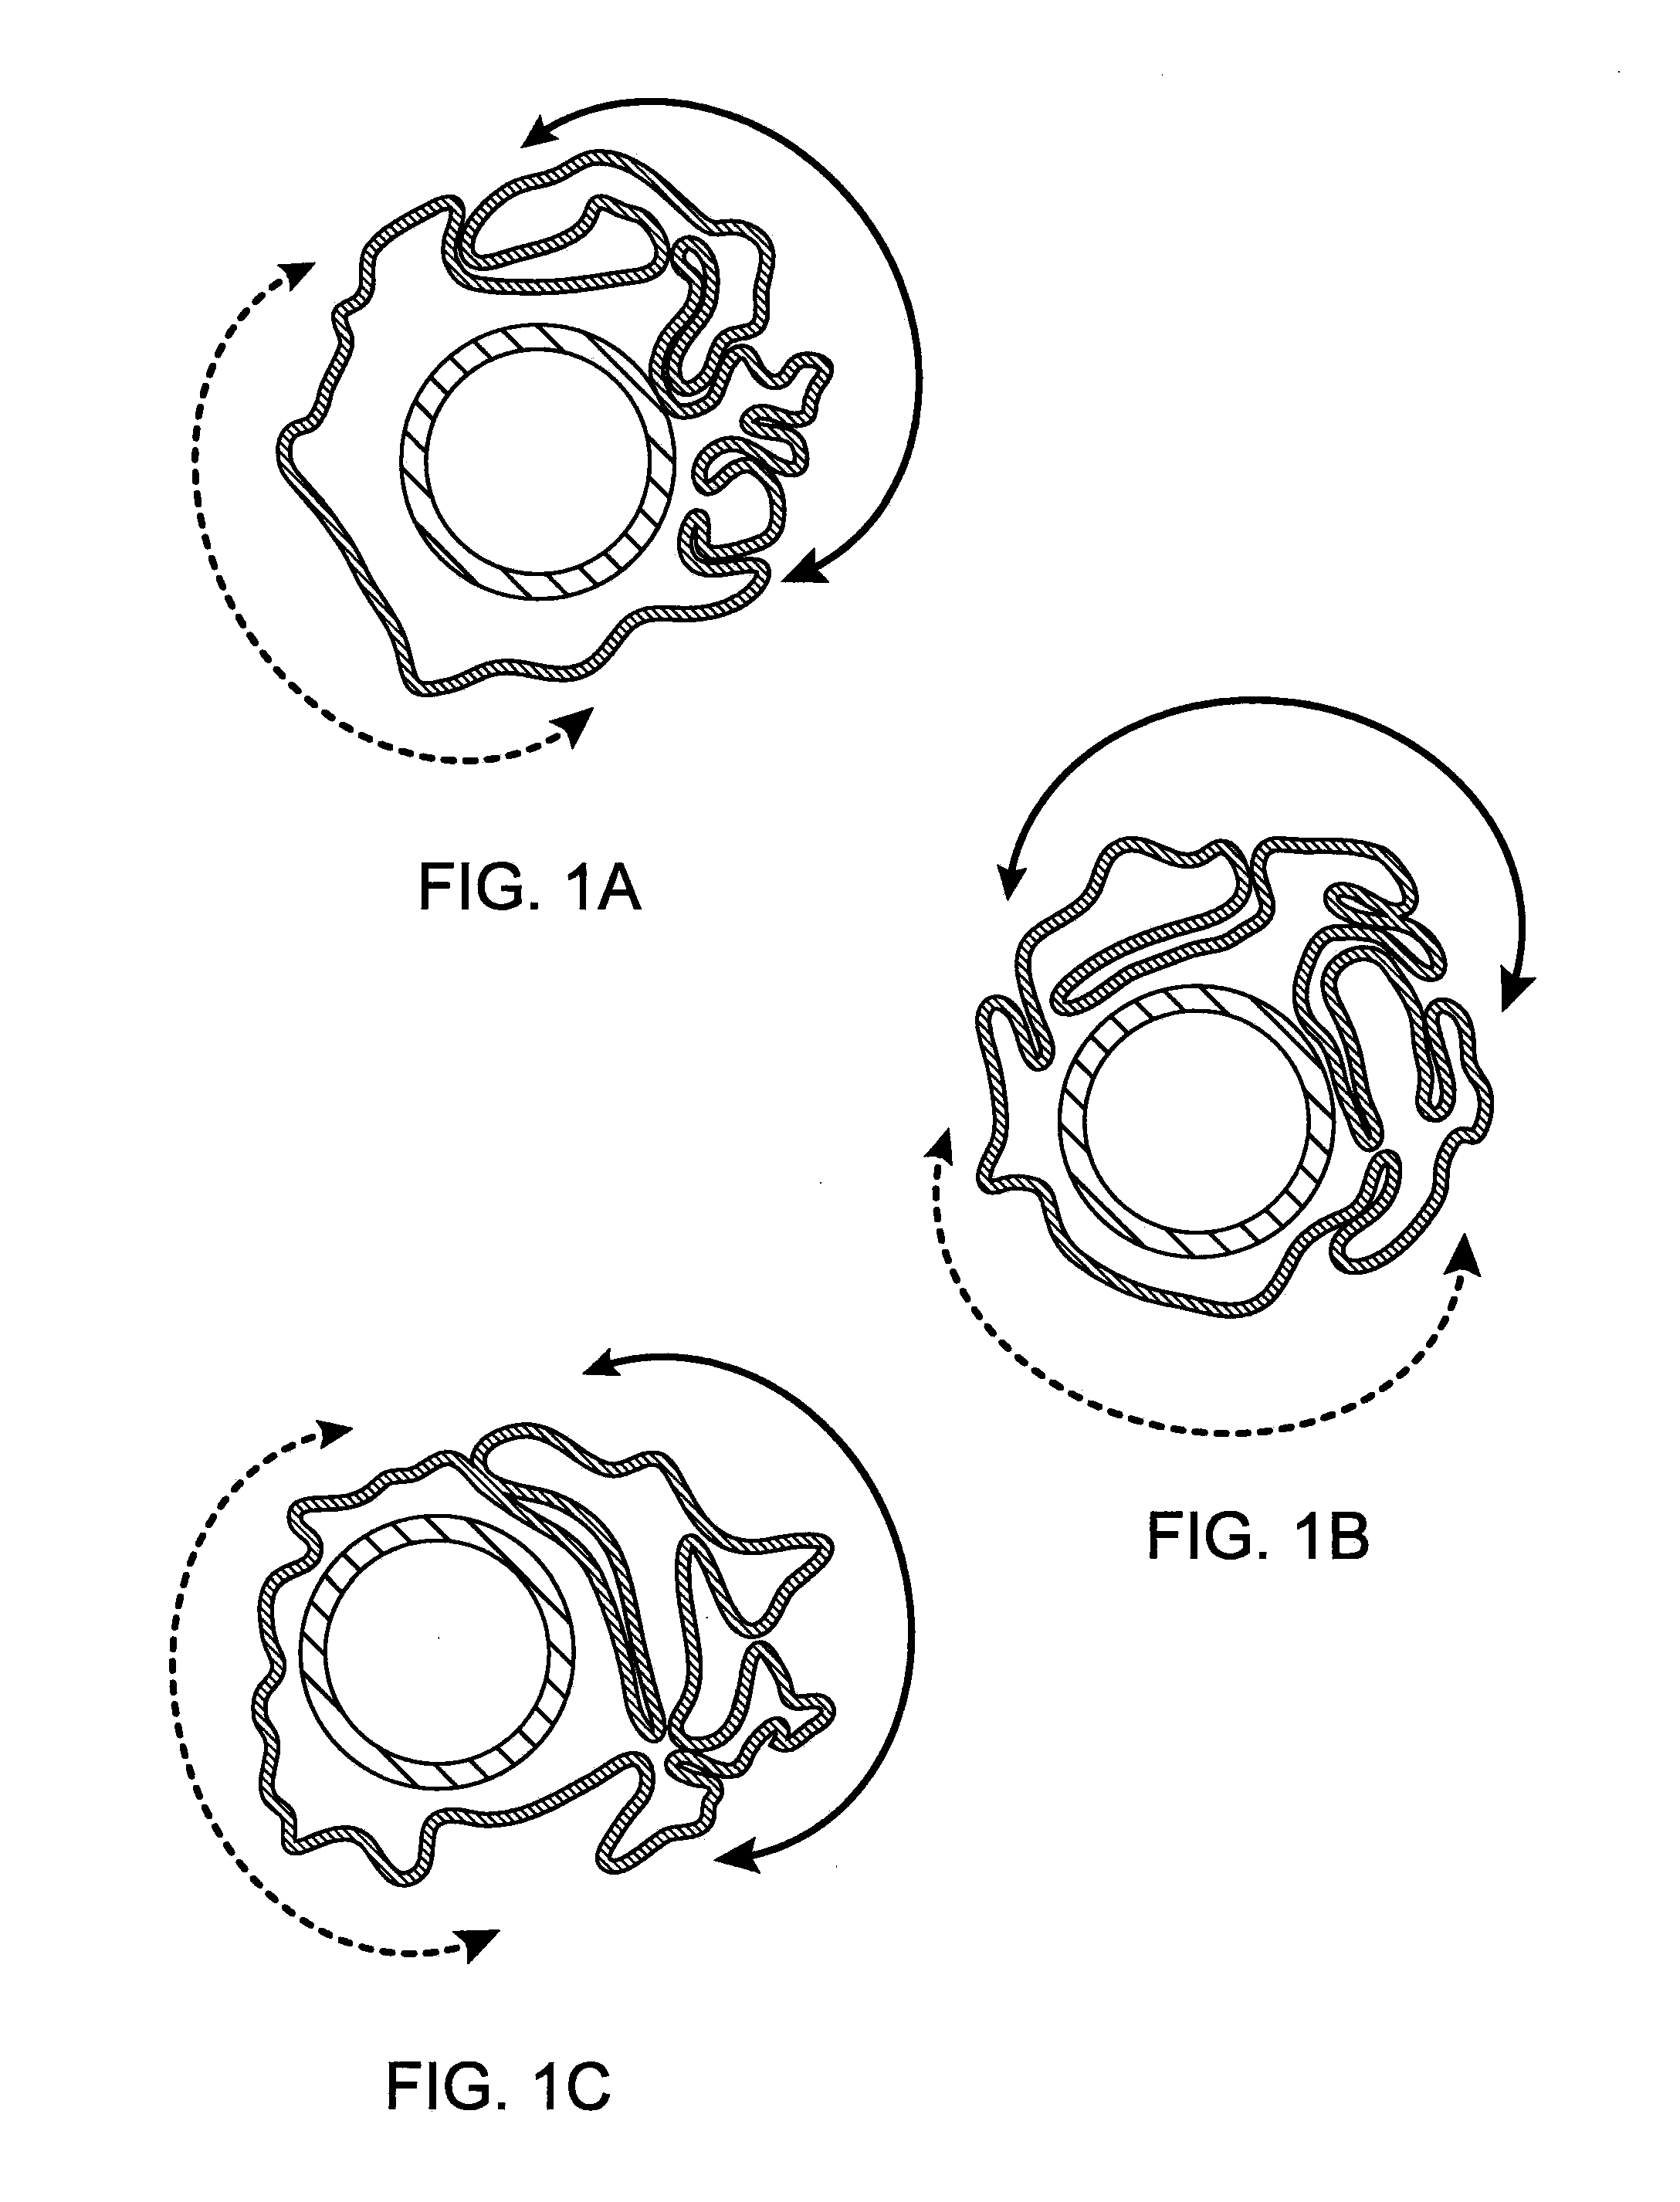 Method of Uniform Crimping and Expansion of Medical Devices